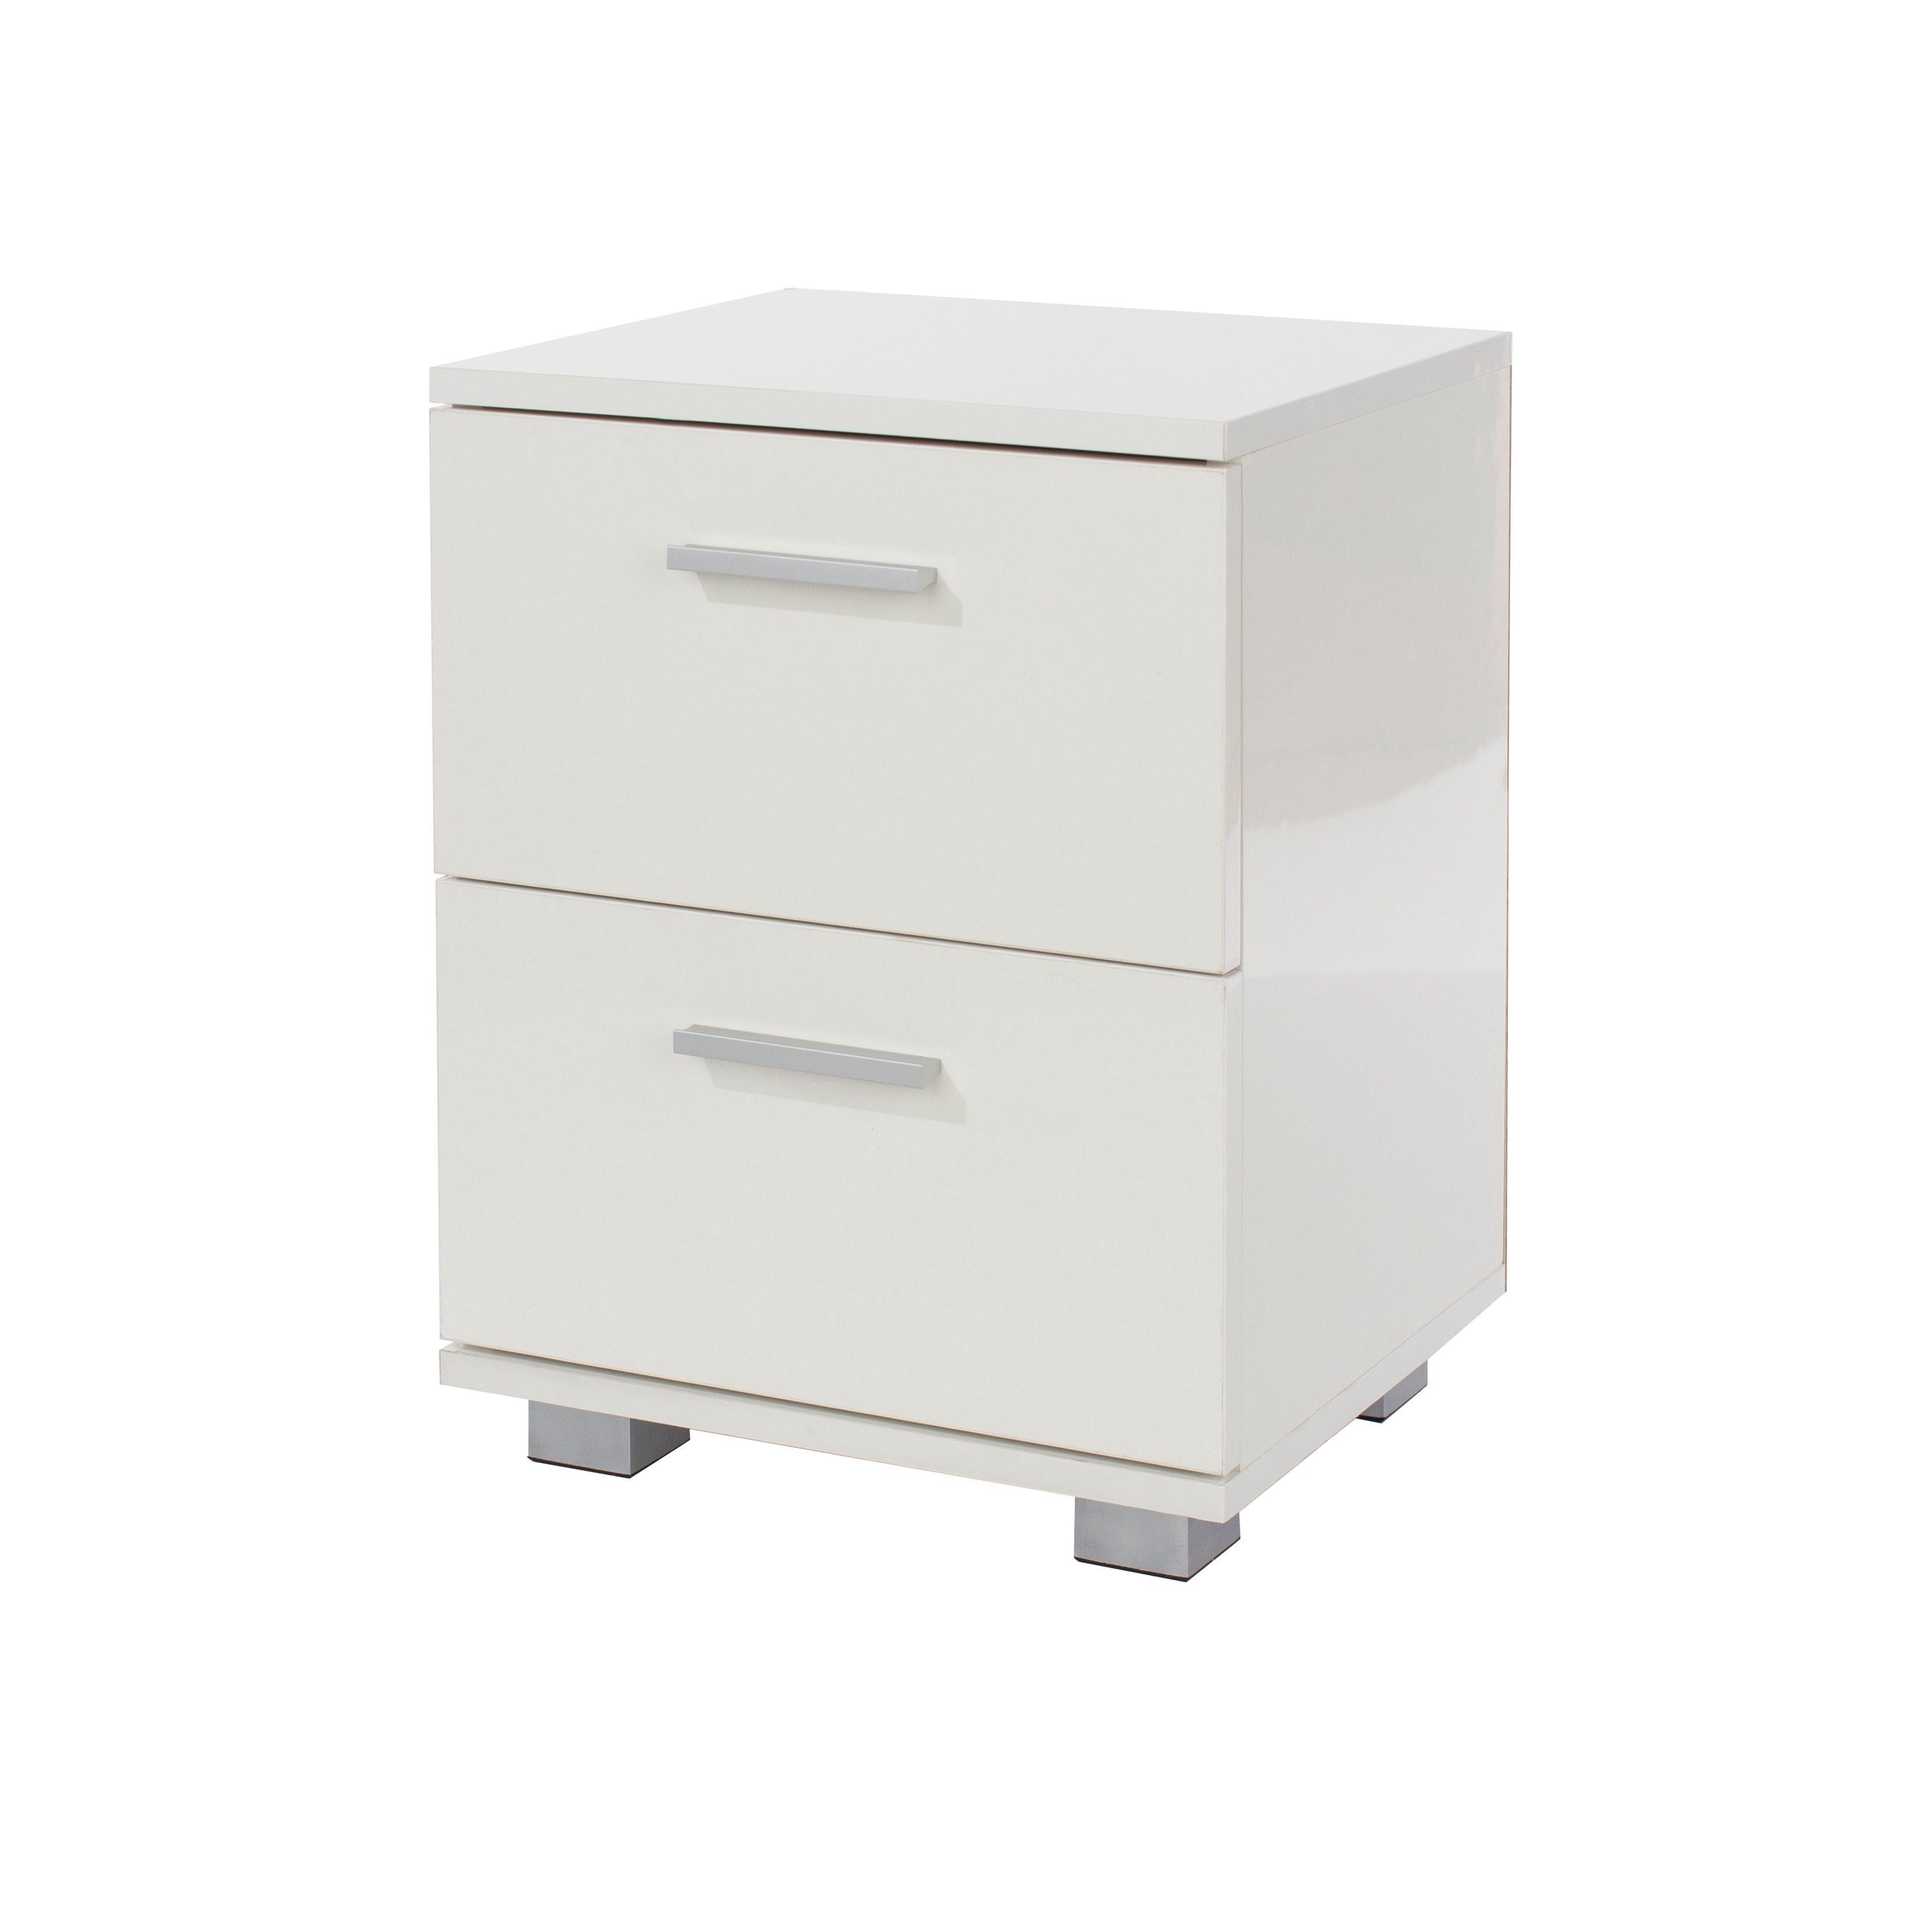 2 Drawers Whites File Cabinets